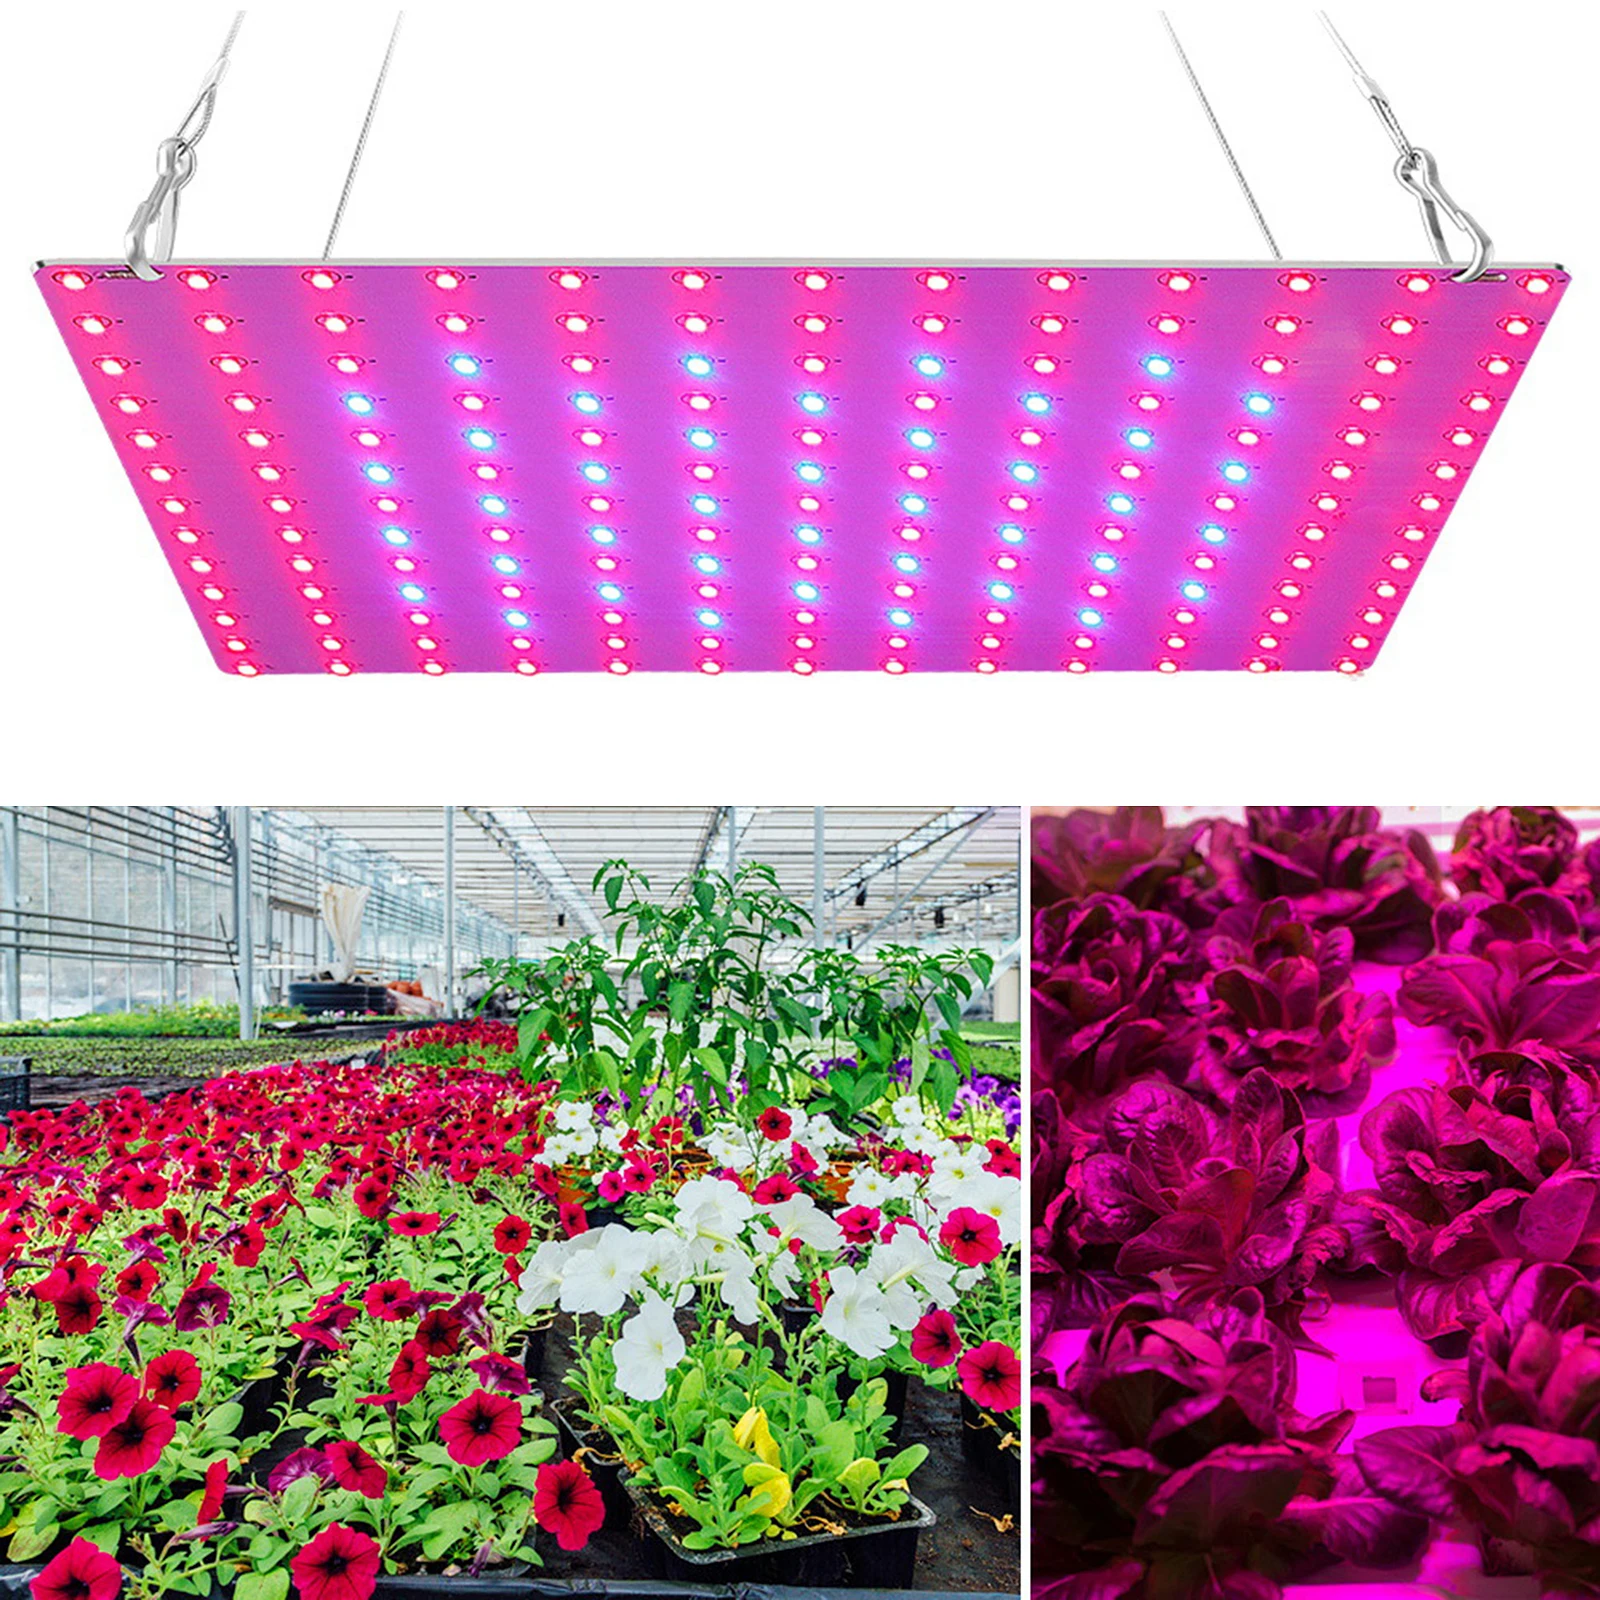 

Grow Light LED Plant 12W Full Spectrum Aluminum 290LM Growth Lamp For Plants Vegetables Fruits Fower Promote Photosynthesis